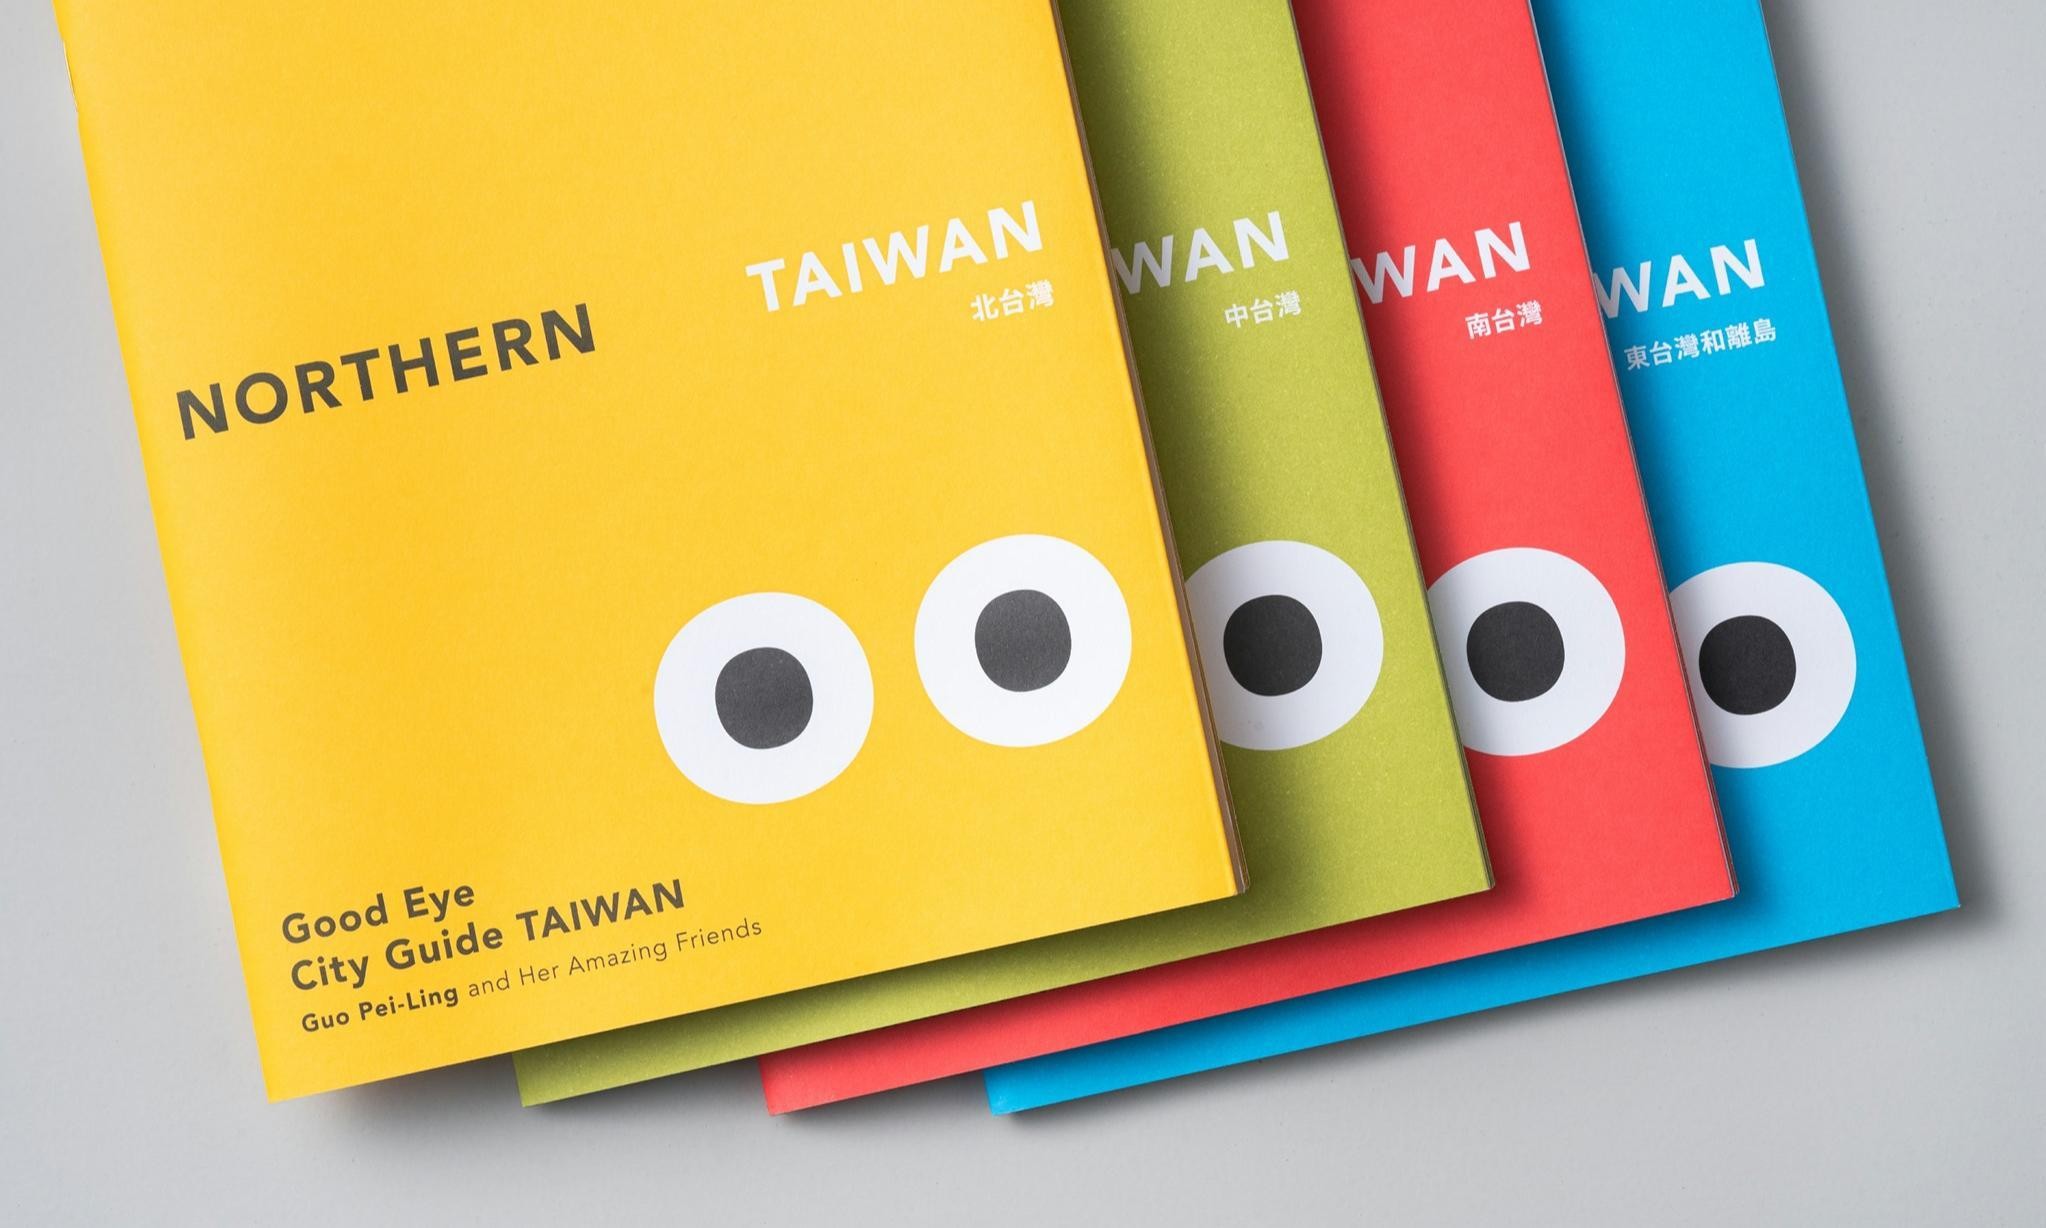 Good Eye City Guide' Is the Ultimate Travel Guide to Taiwan - The News Lens  International Edition